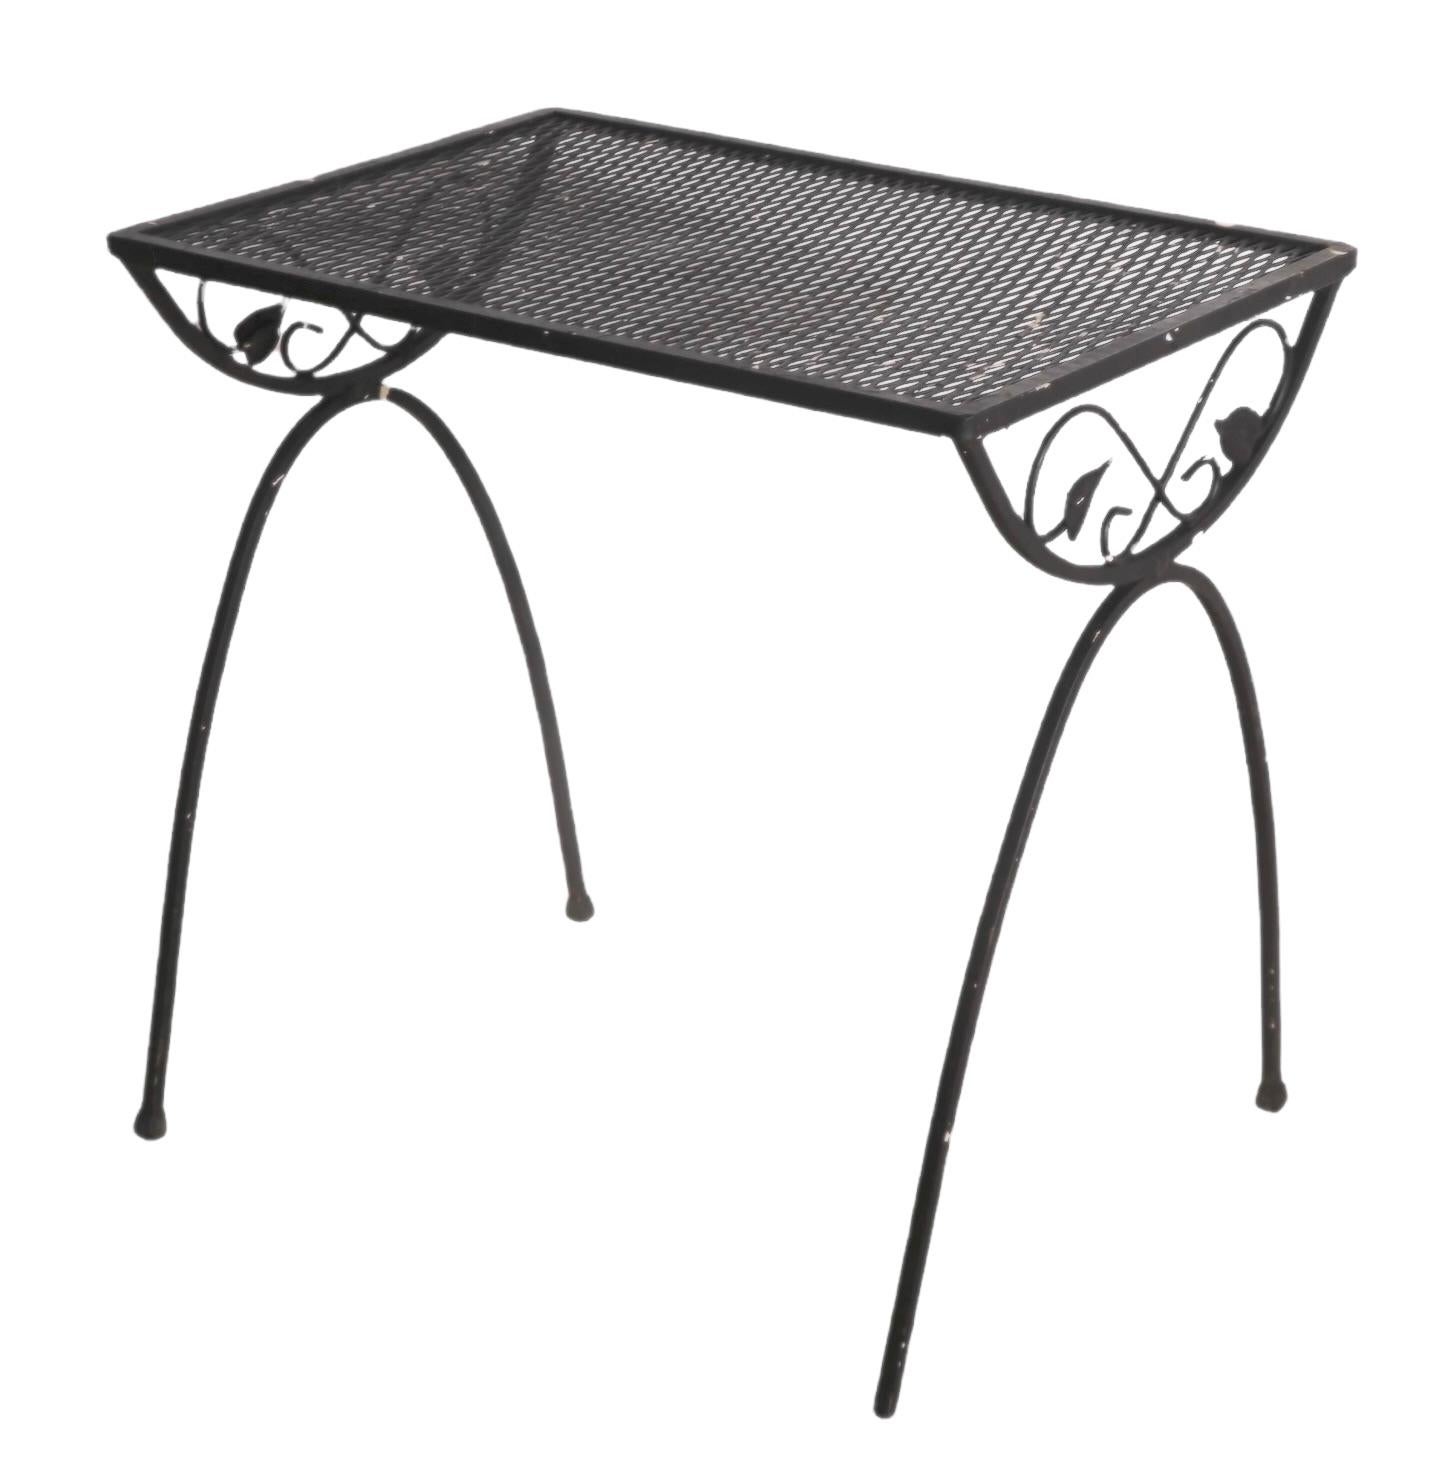 Garden, patio, poolside or sunroom side table having arched legs and top support, and a metal mesh top. Probably by Woodard, unsigned. The table is structurally sound and sturdy, the black paint finish shows wear, and some plastic feet are missing.